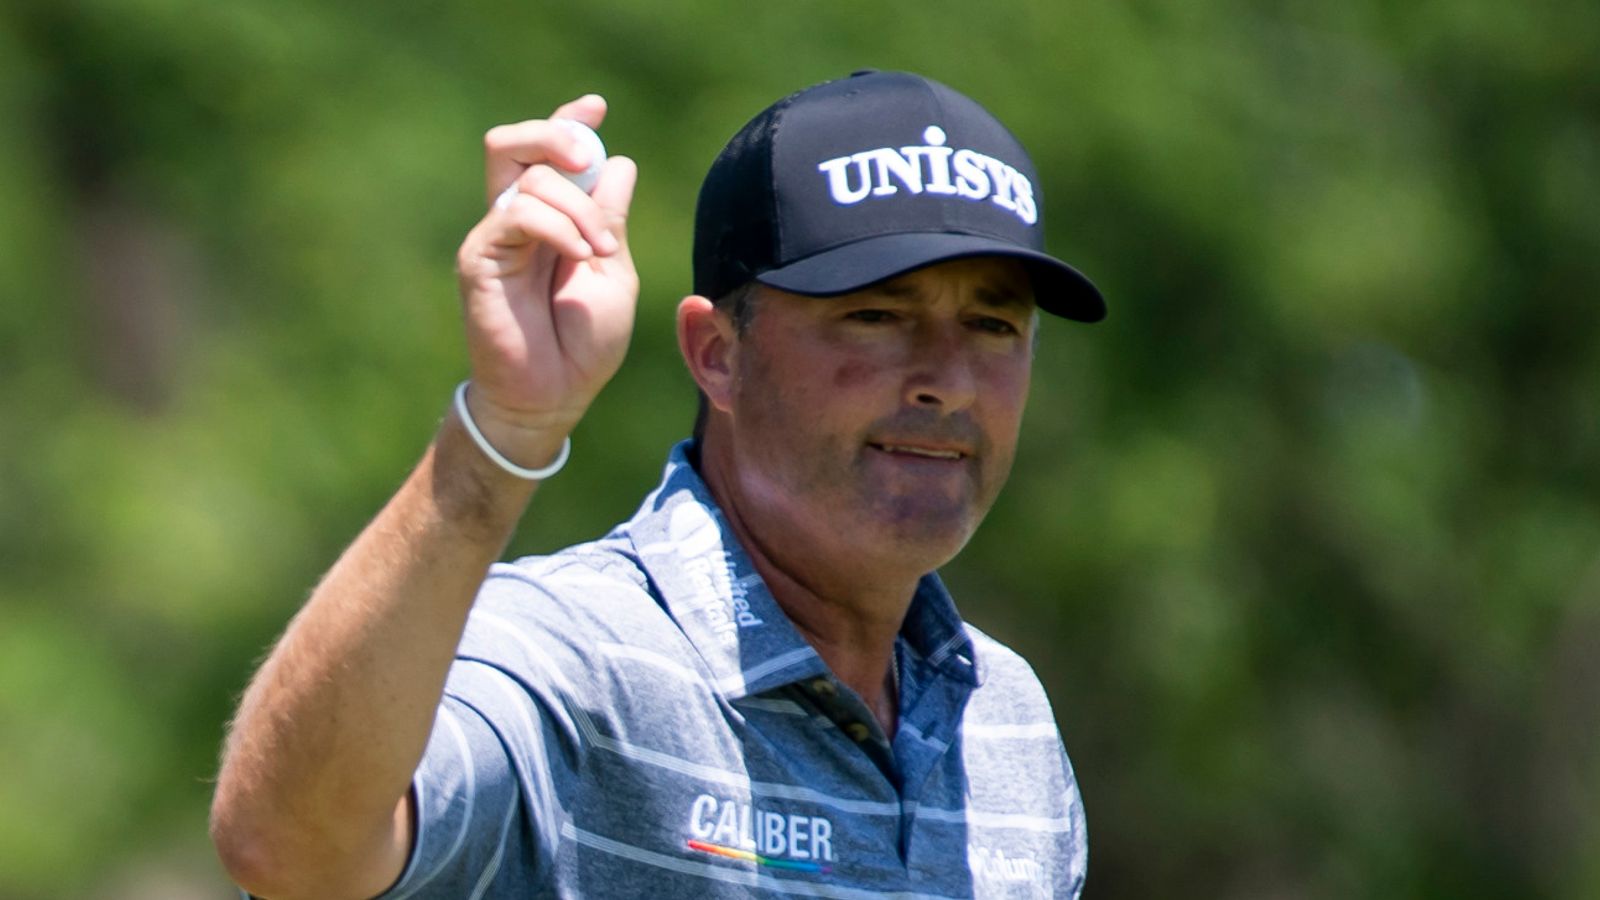 Ryan Palmer joins threeway tie atop Byron Nelson leaderboard at